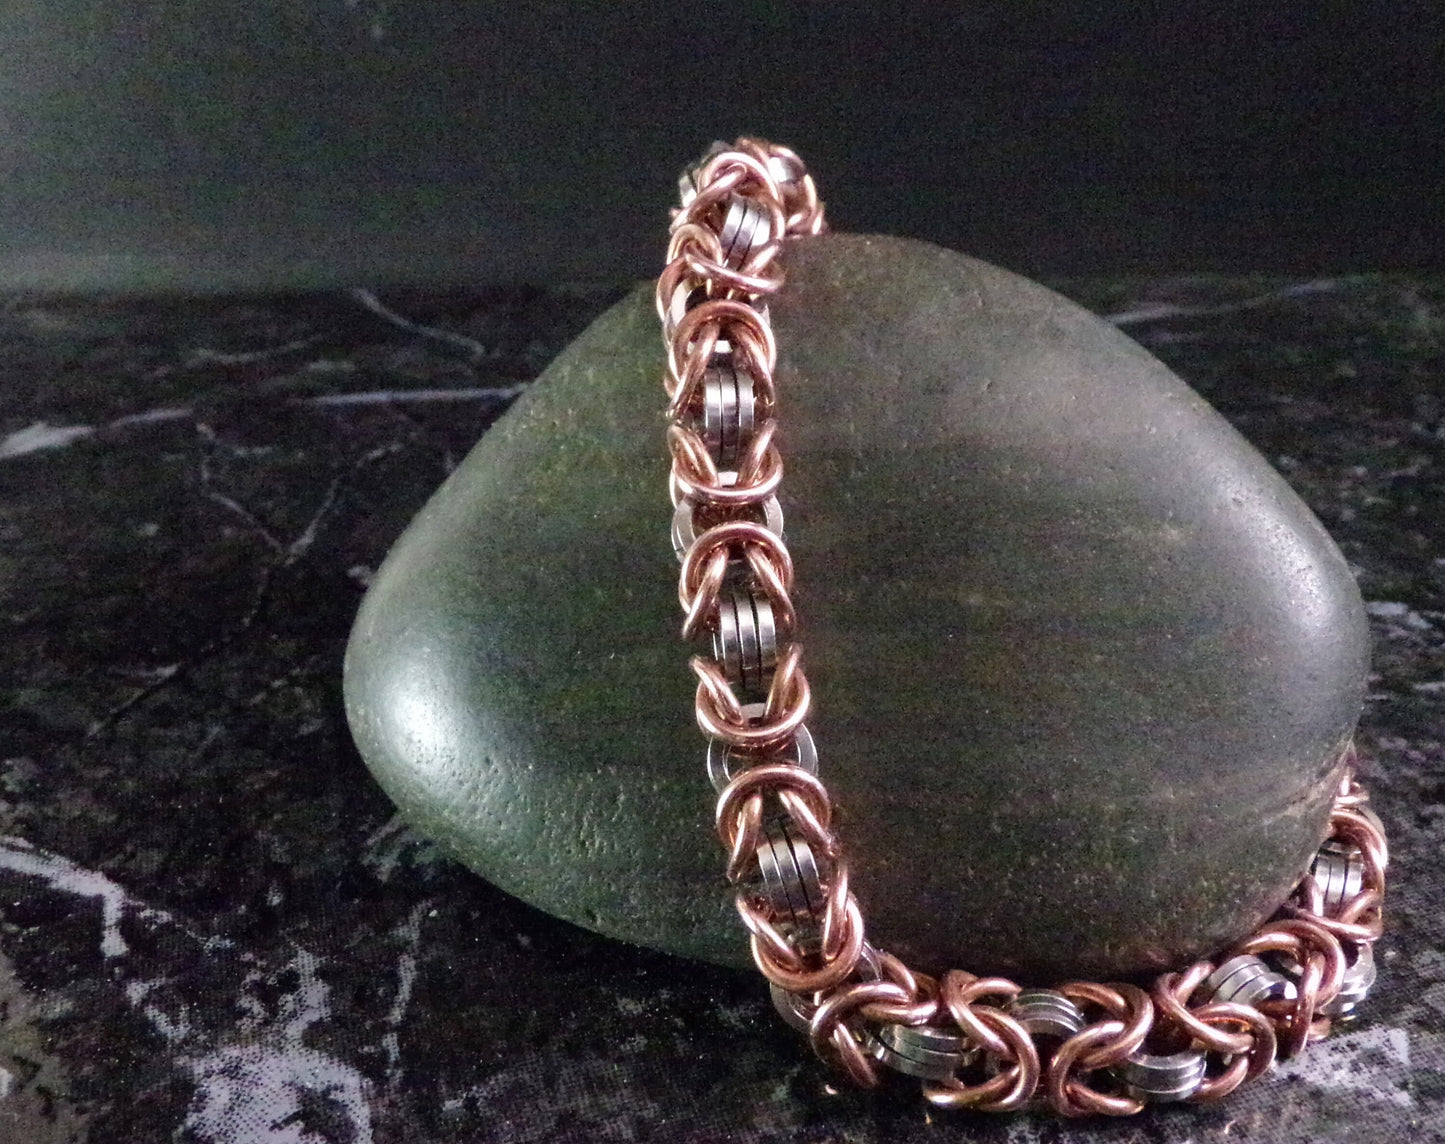 Copper and Square Stainless Steel Unisex bracelet